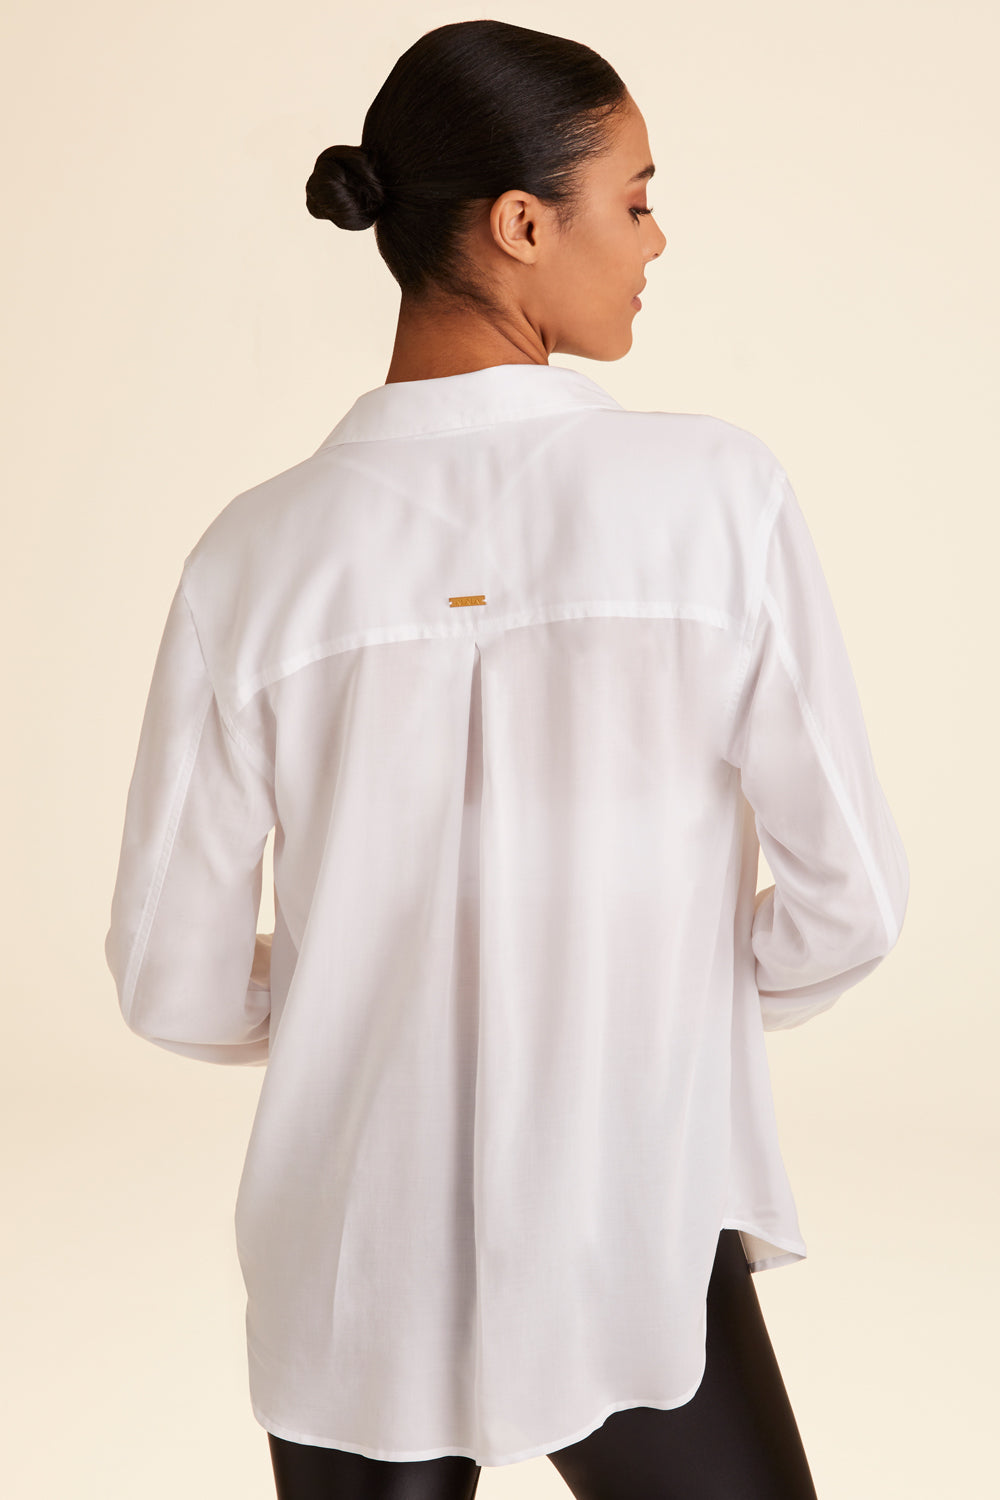 Back view of Alala Women's Luxury Athleisure lightweight woven pullover shirt in white